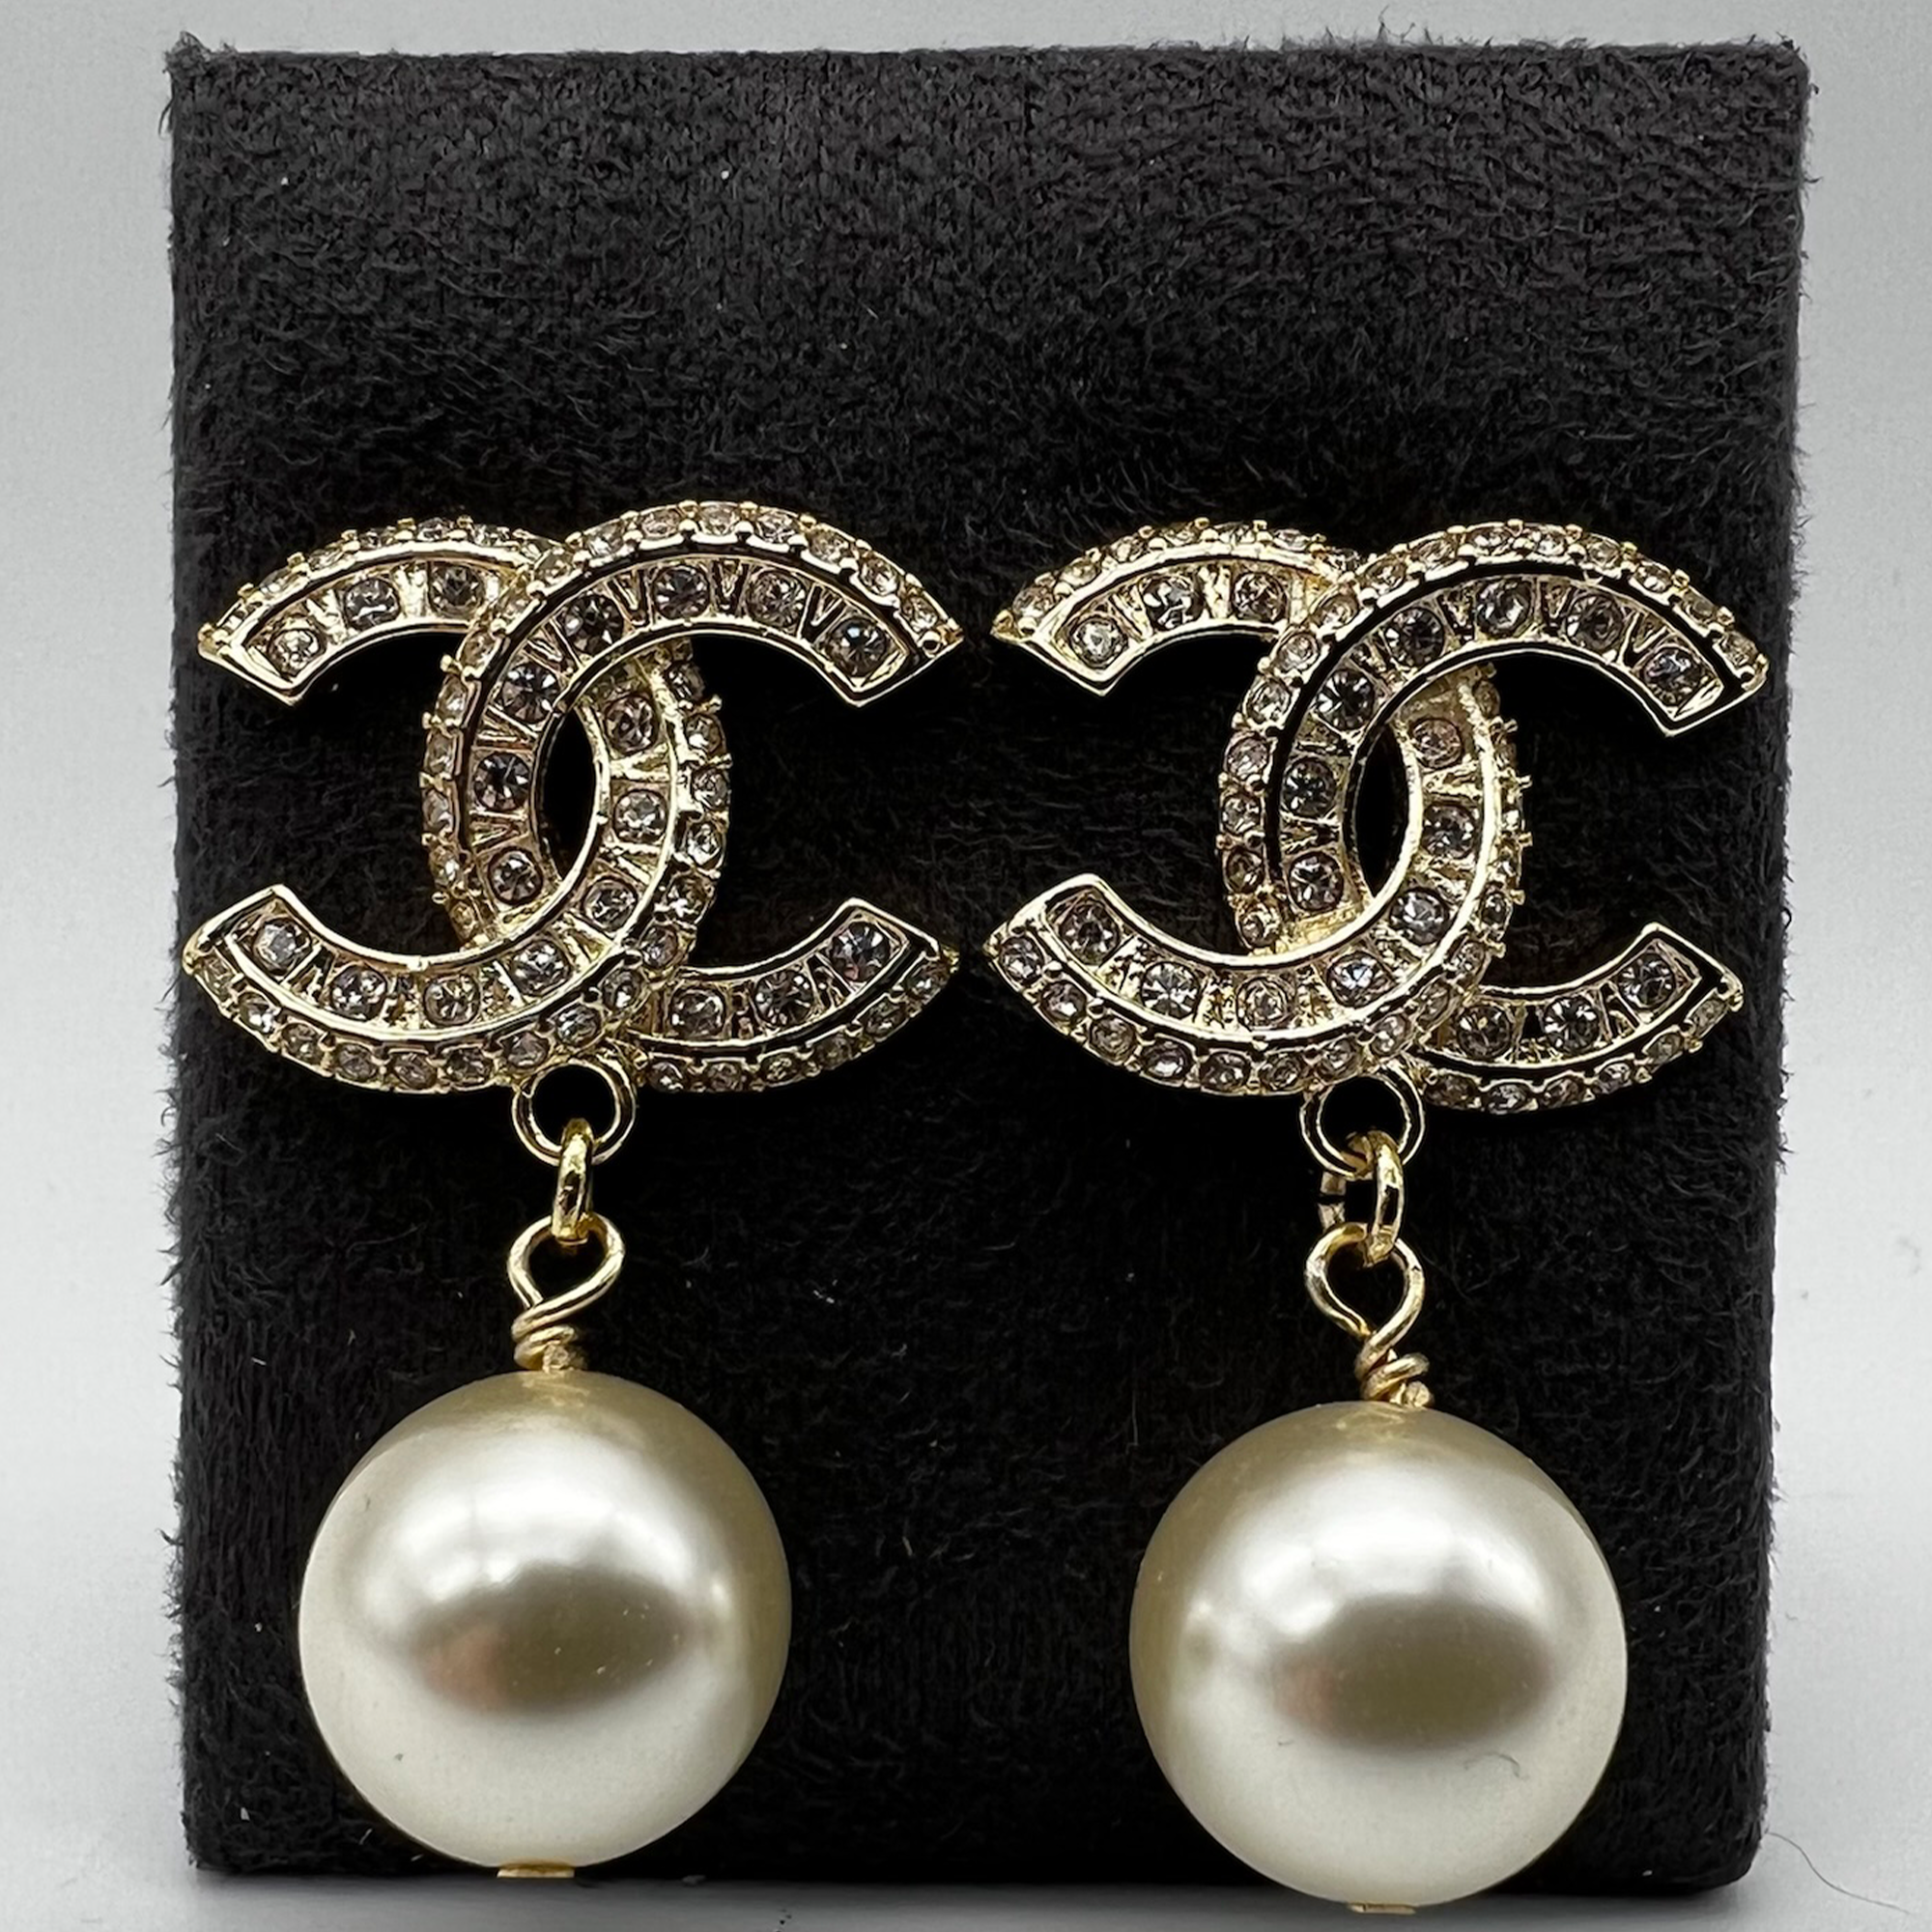 Designer Vintage Turn of the Century Chanel Gilt Faux Pearl Drop Earrings   Liberty